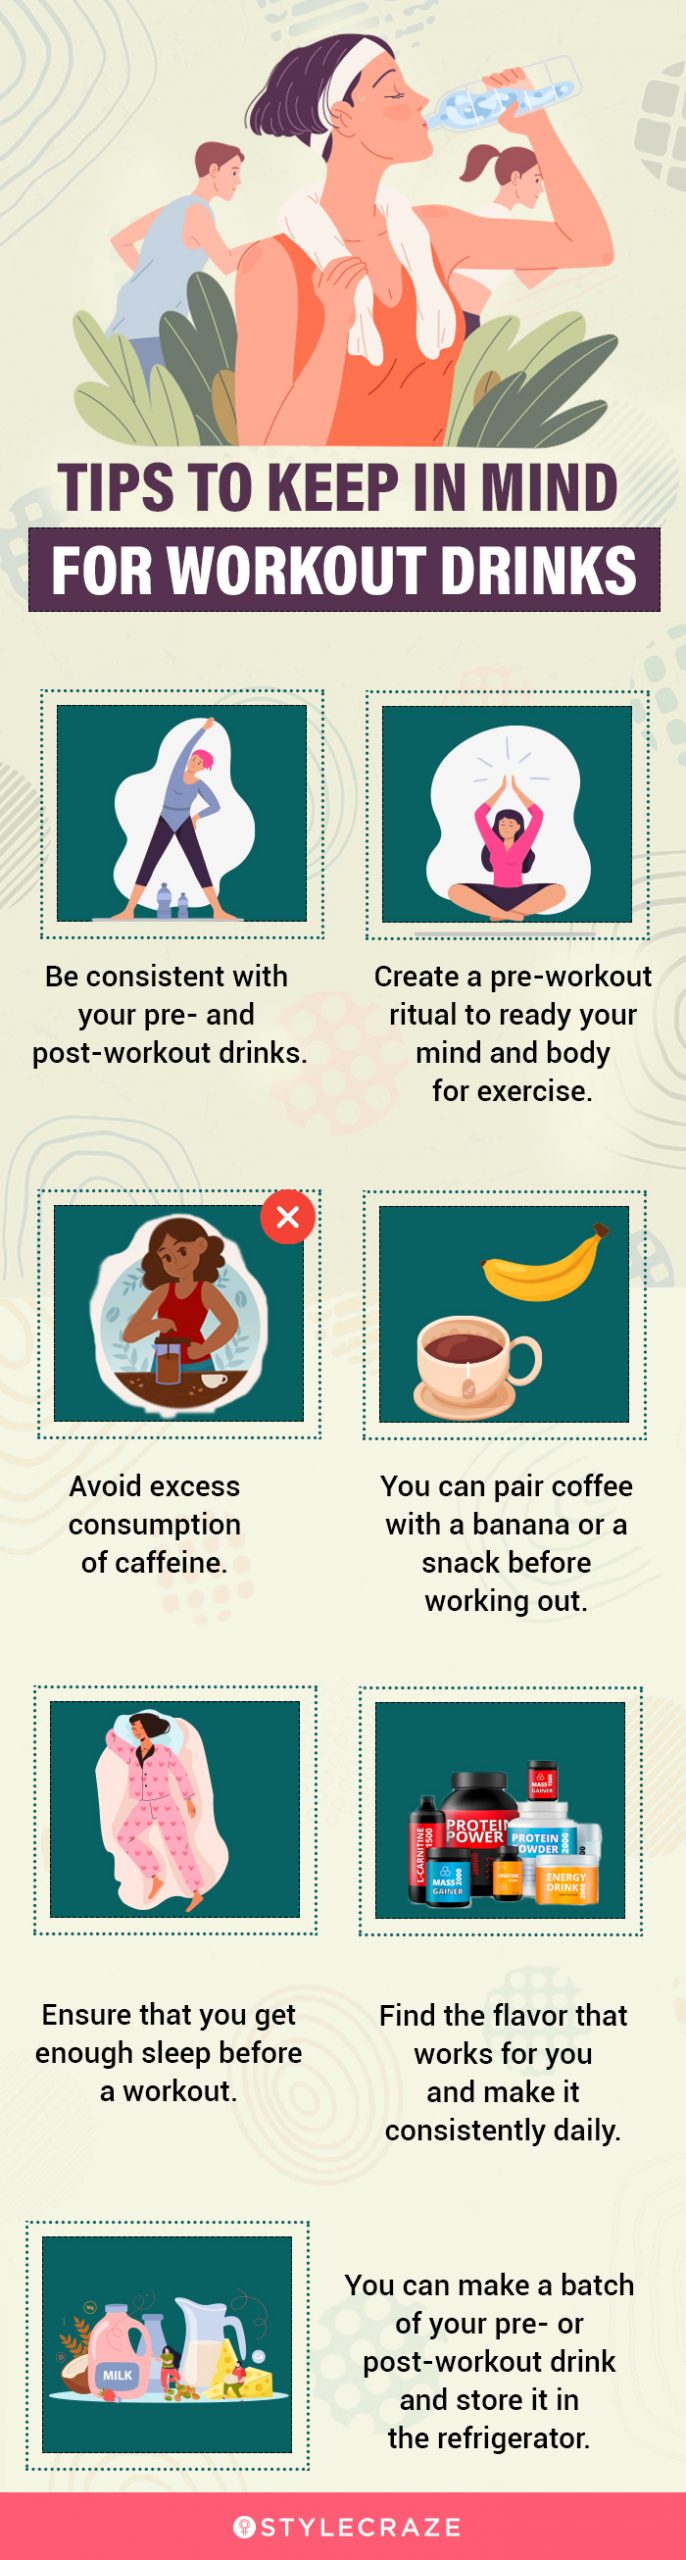 tips to keep in mind for workout drinks (infographic)